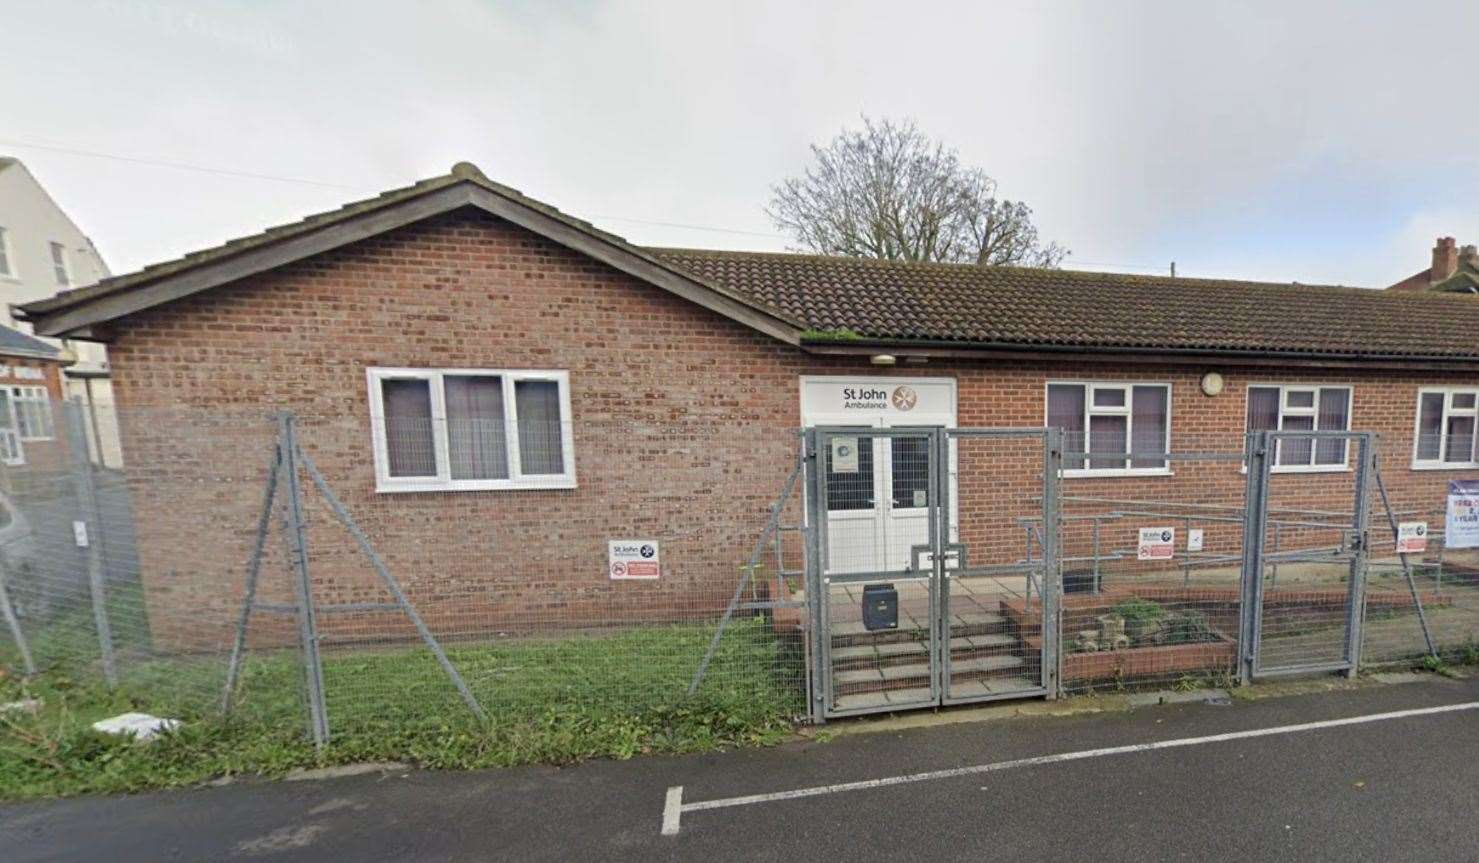 First Learners Nursery in Folkestone has received an inadequate Ofsted rating after inspectors highlighted concerns with teaching and safeguarding. Picture: Google Maps